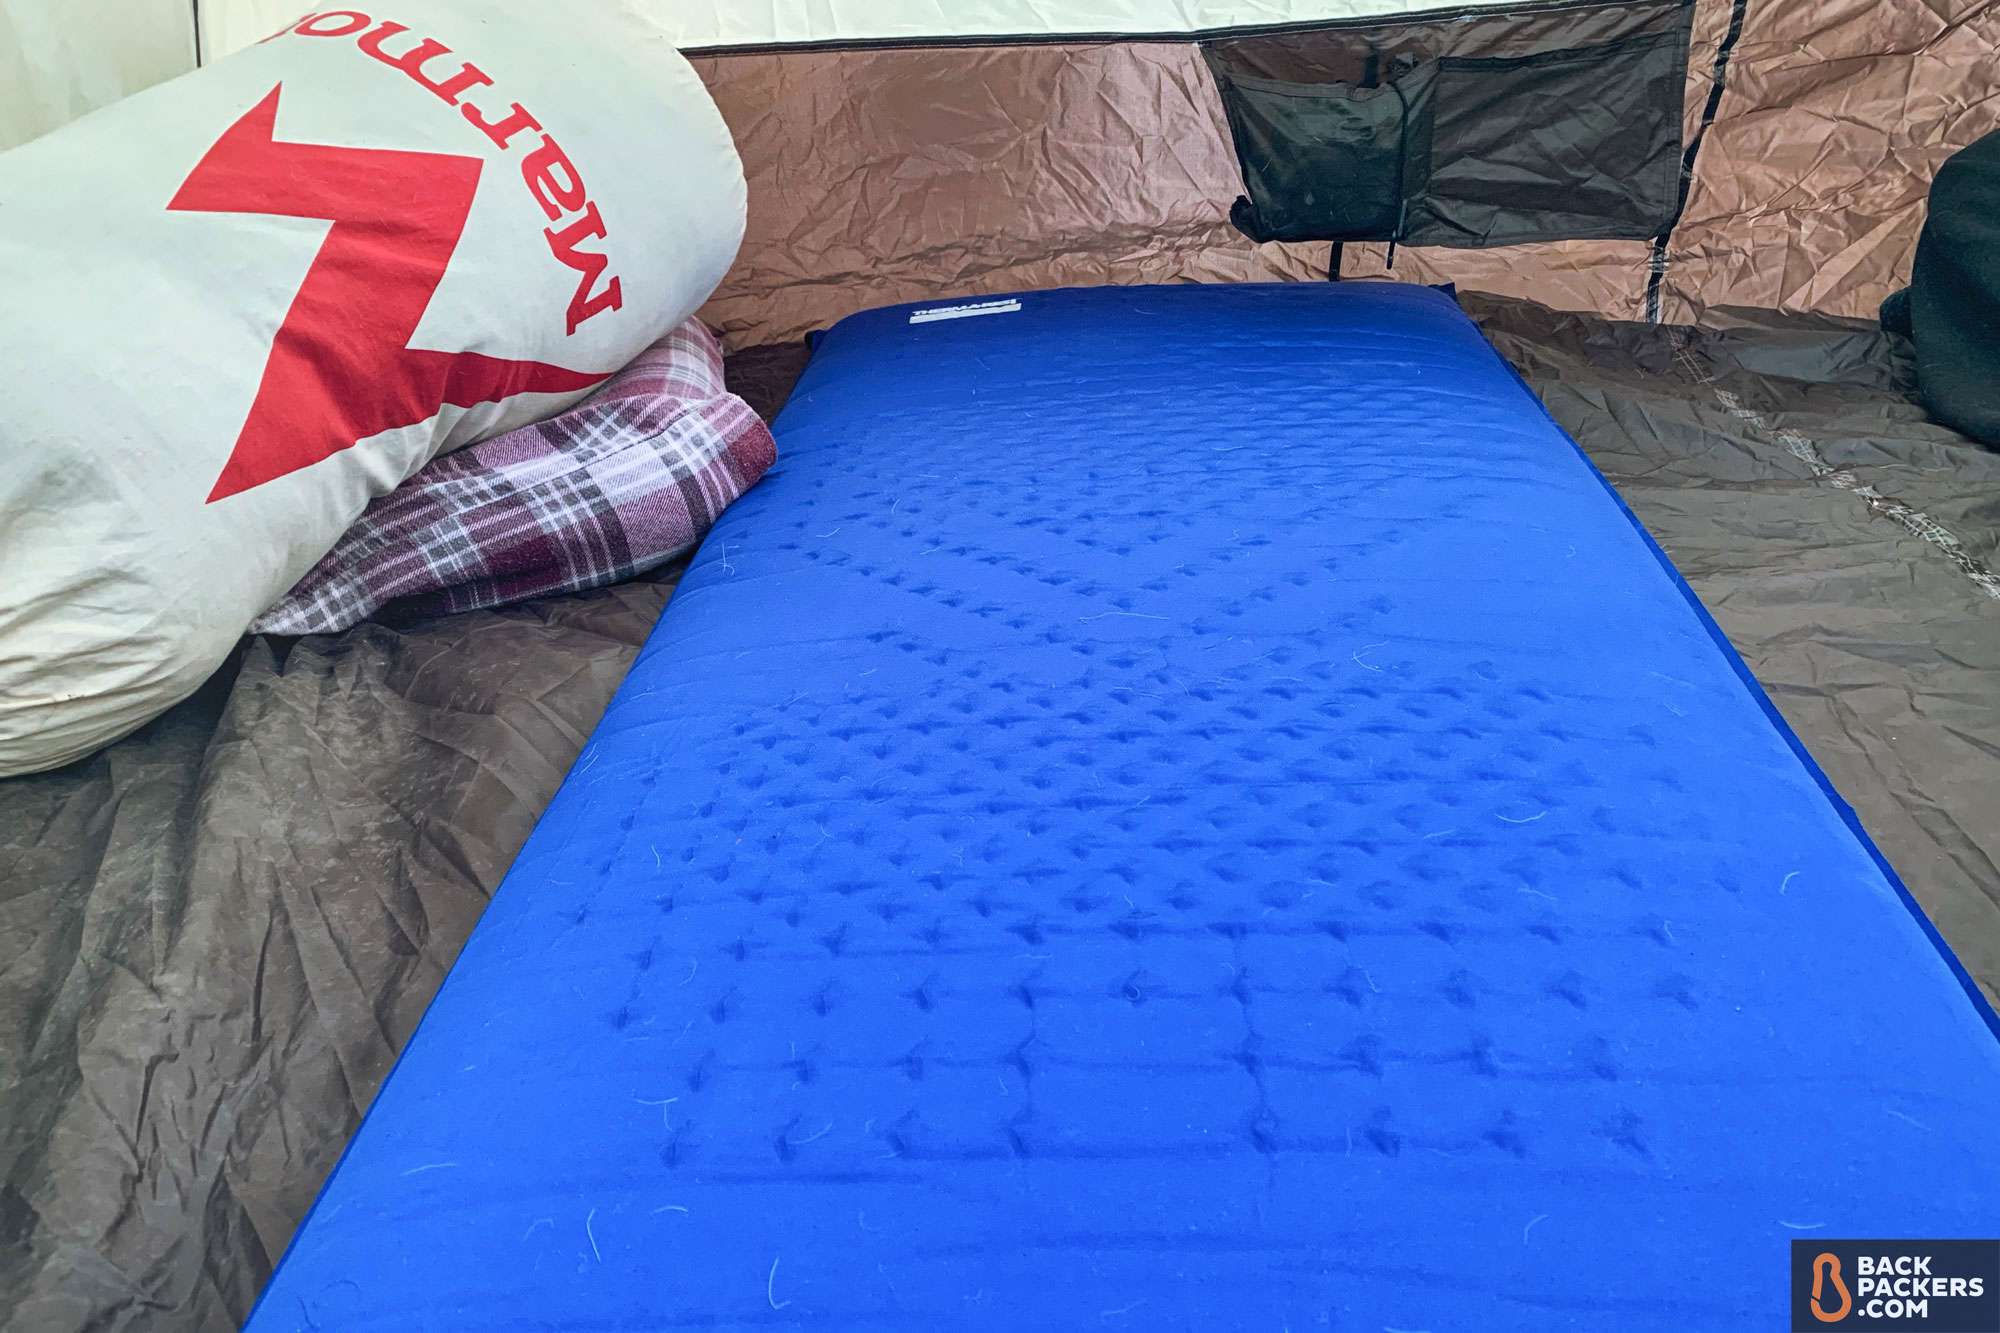 thermarest luxury map air mattress large